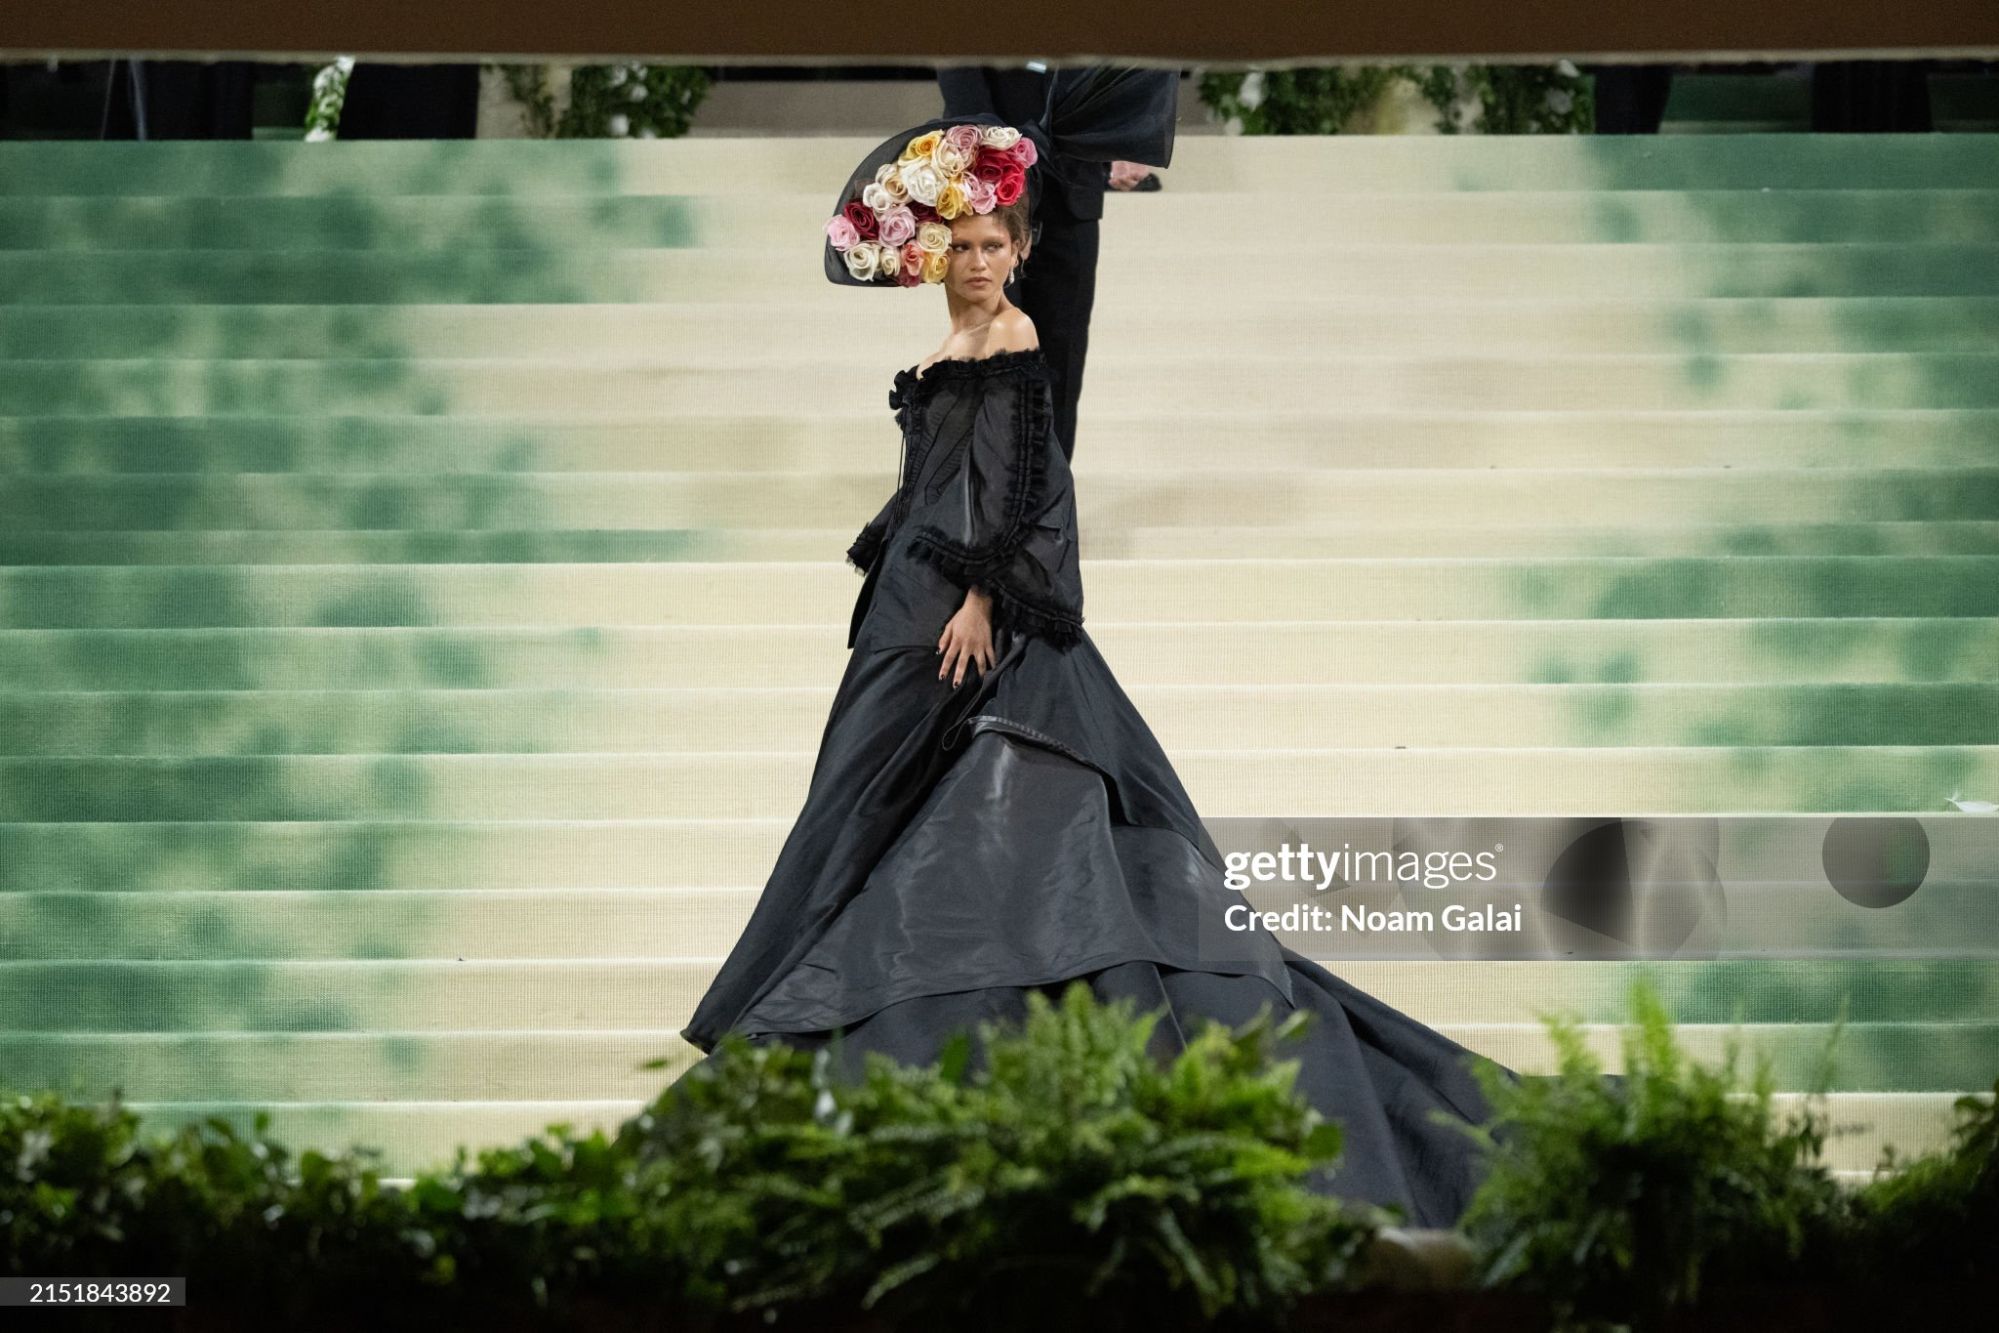 gettyimages-2151843892-2048x2048.jpg